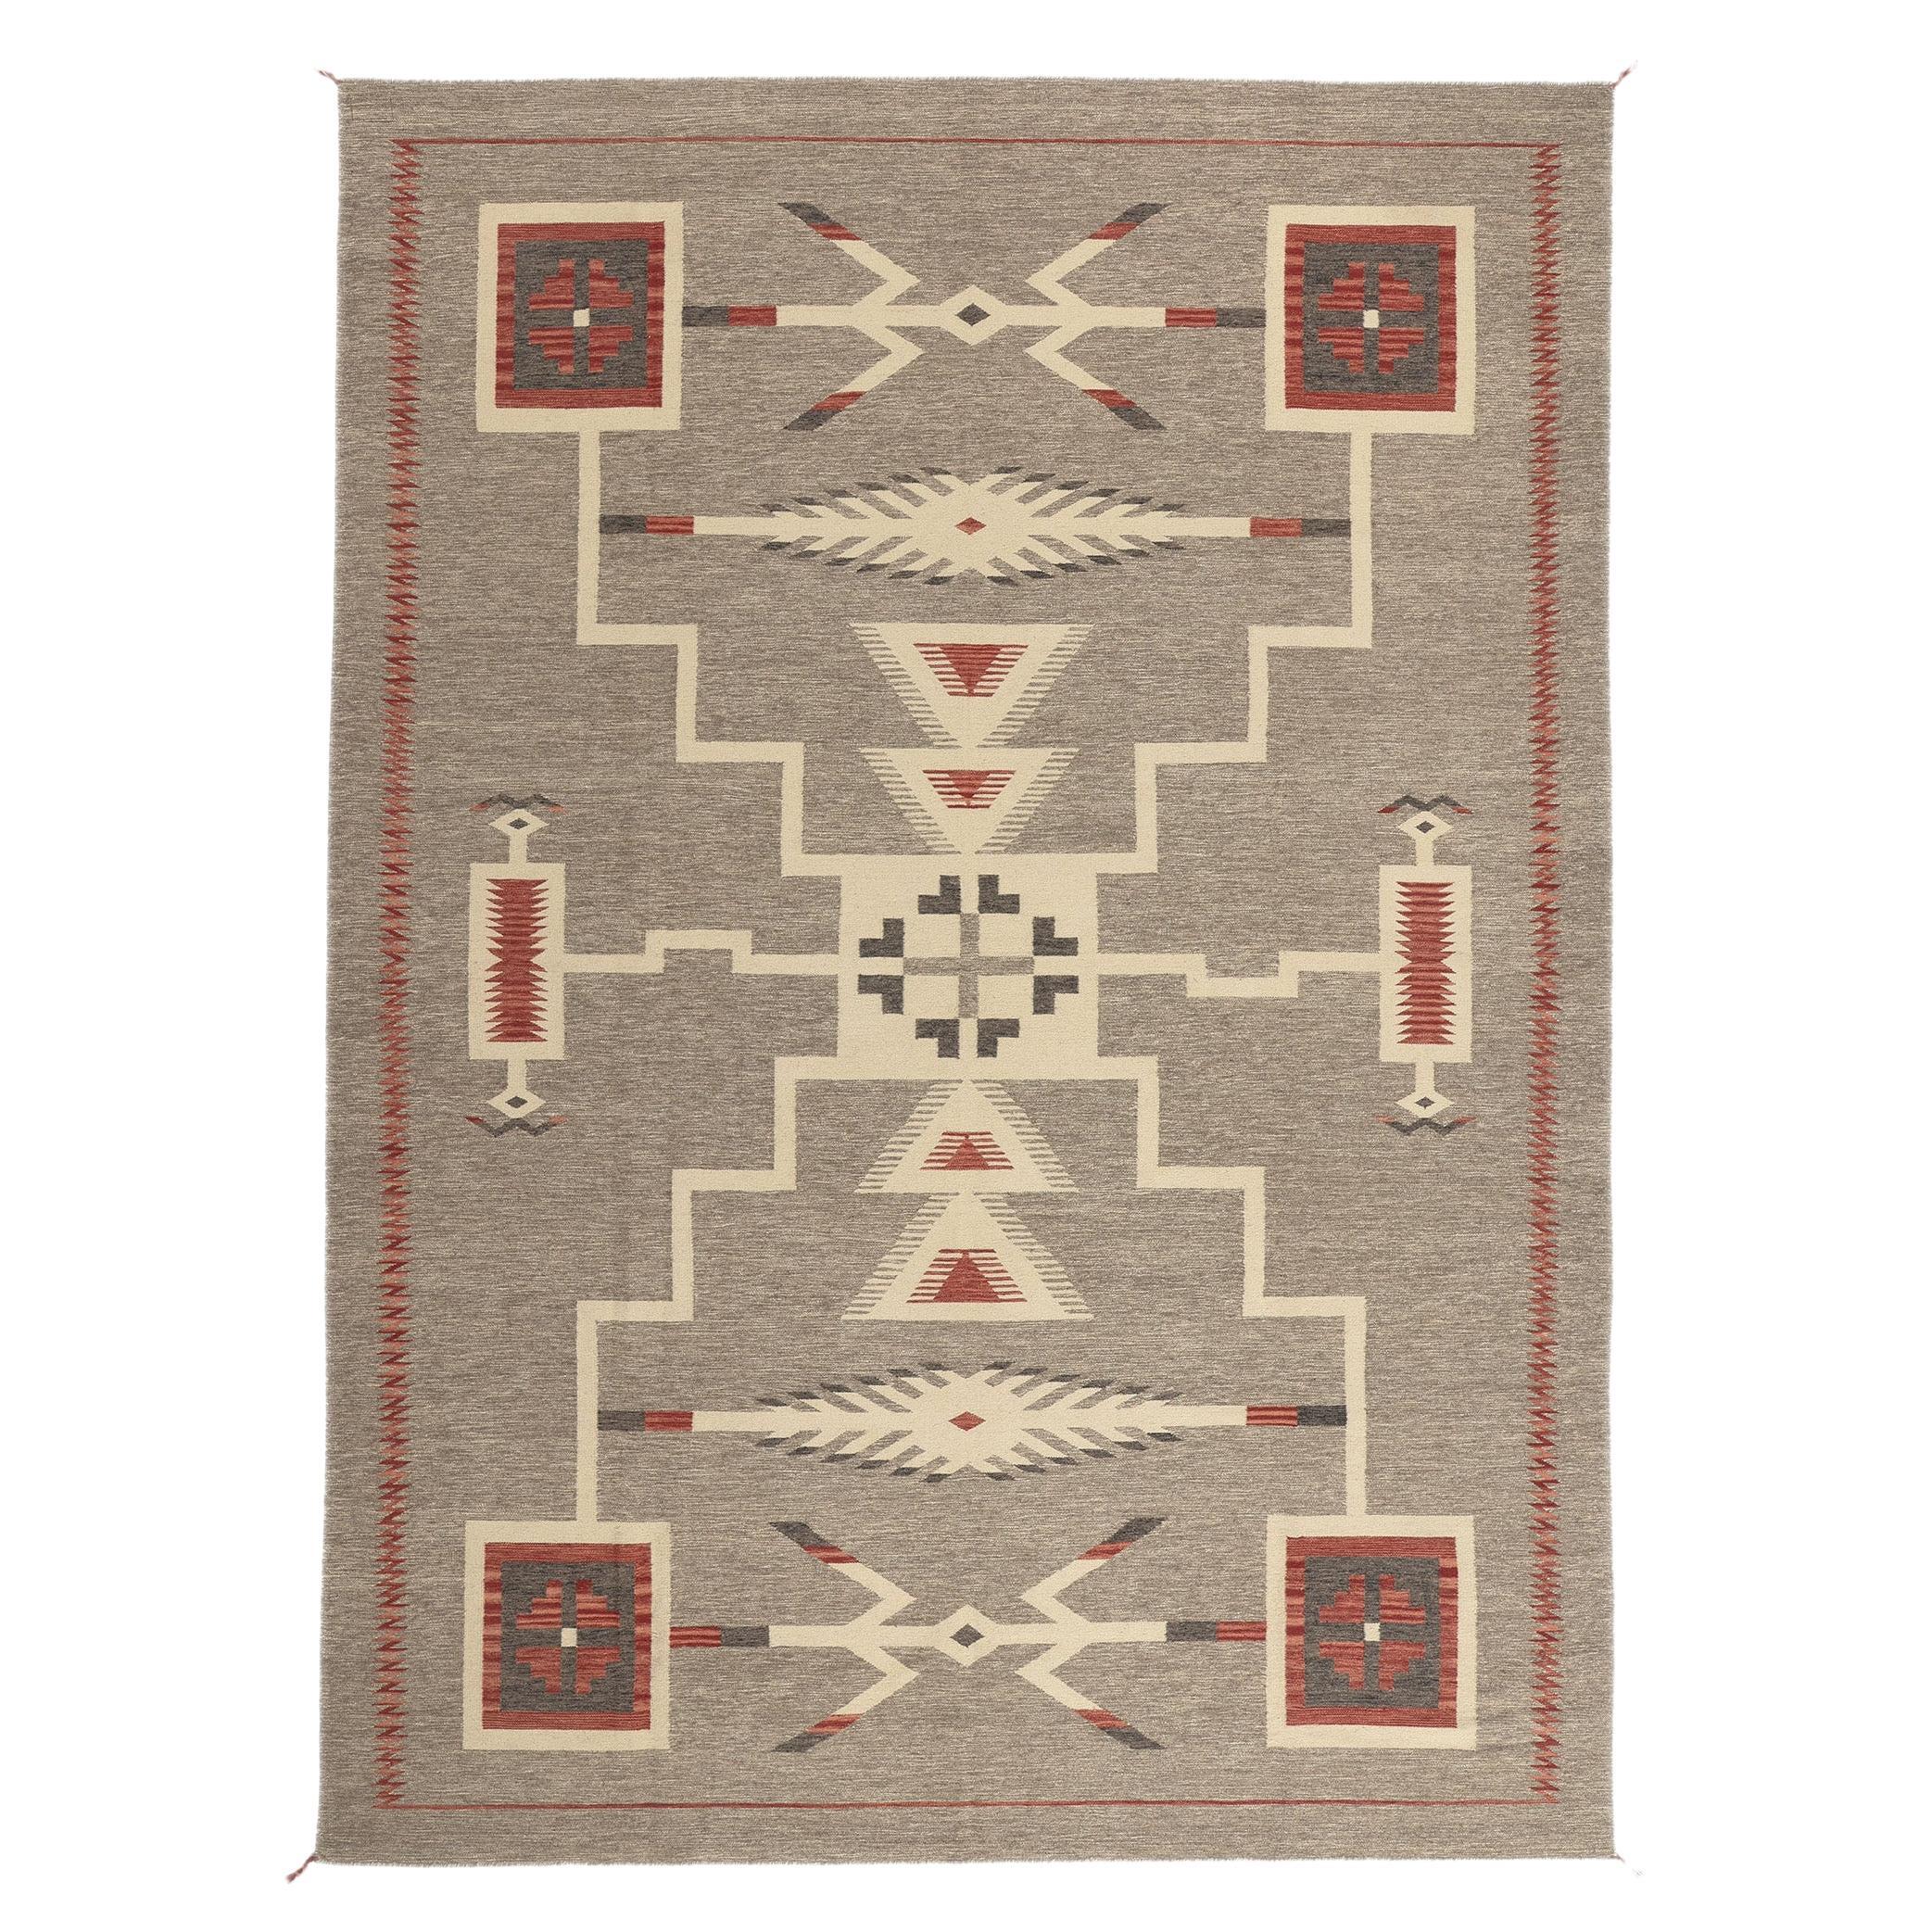 Contemporary Santa Fe Southwest Modern Navajo-Style Rug with Storm Pattern For Sale